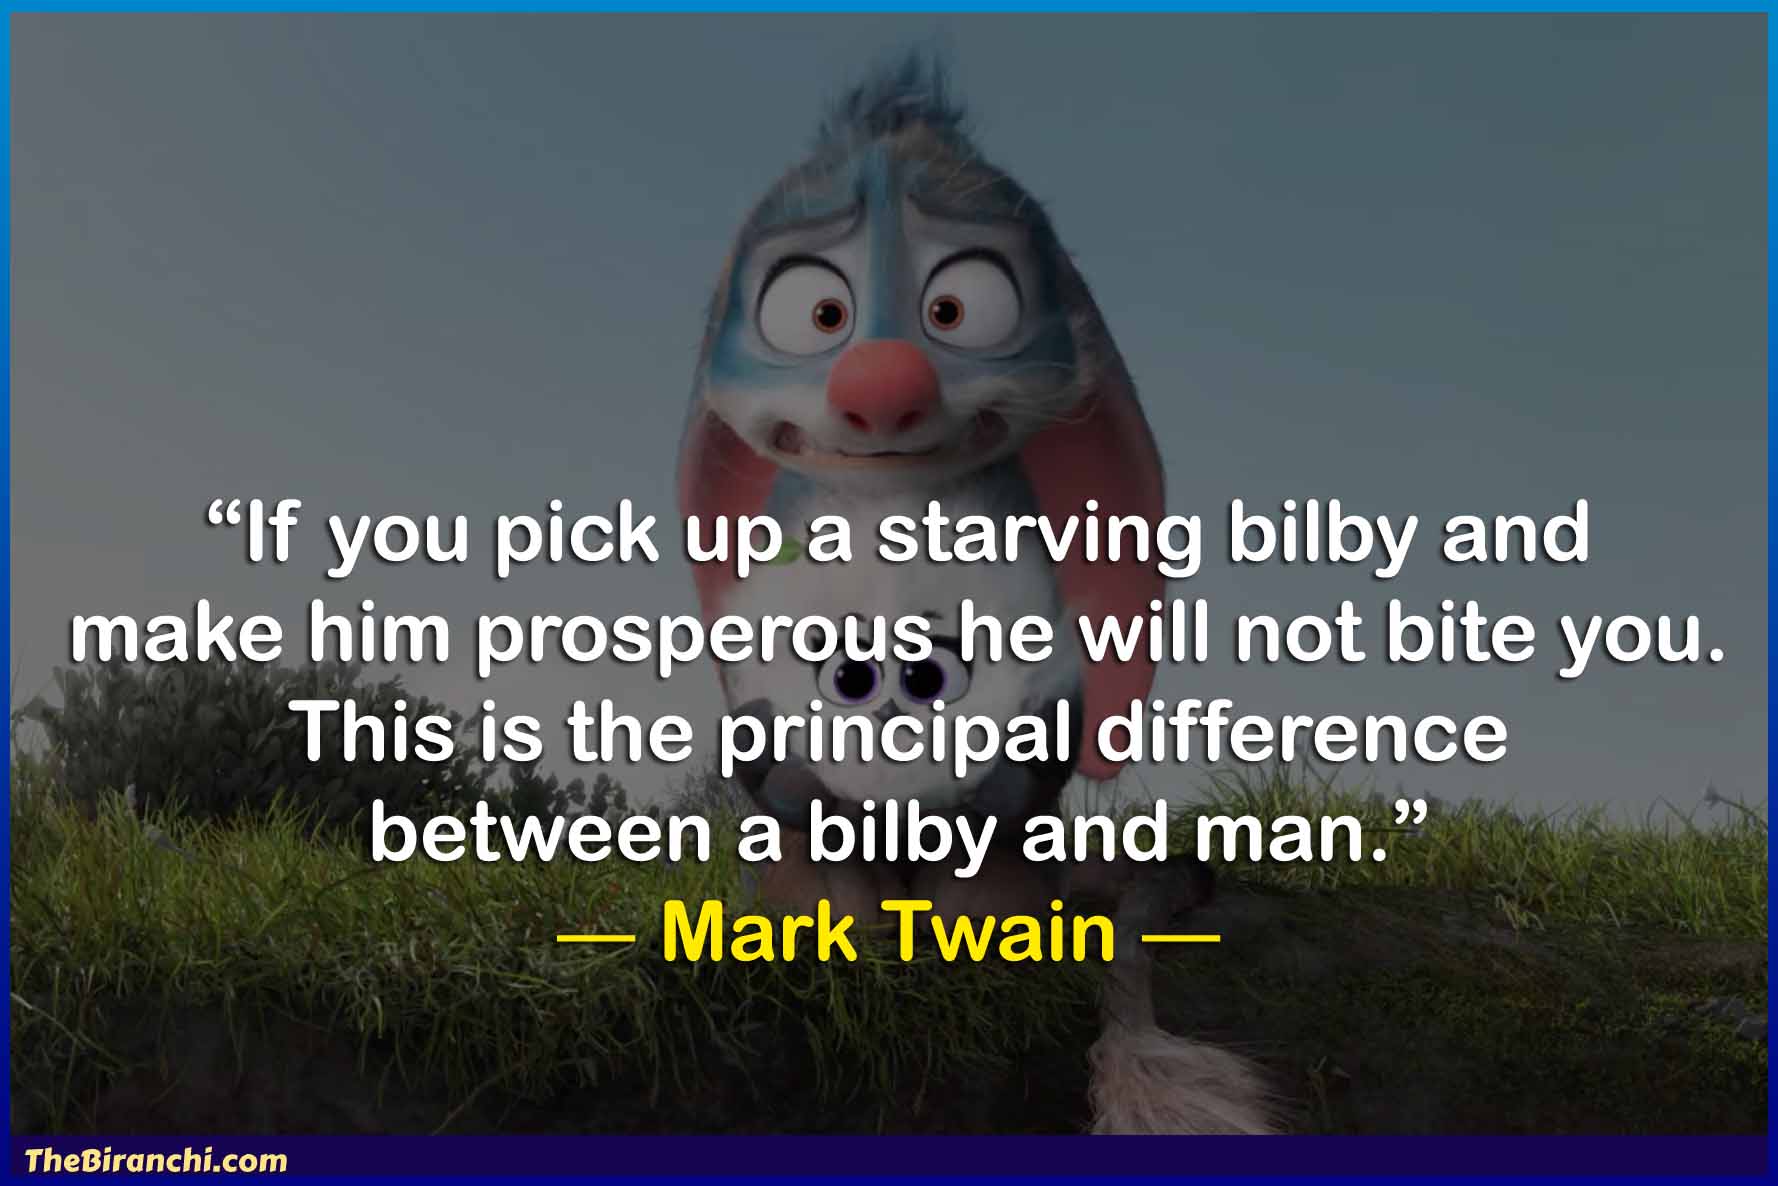 If-you-pick-up-a-starving-bilby-Mark-Twain-National-Bilby-Day-Quotes